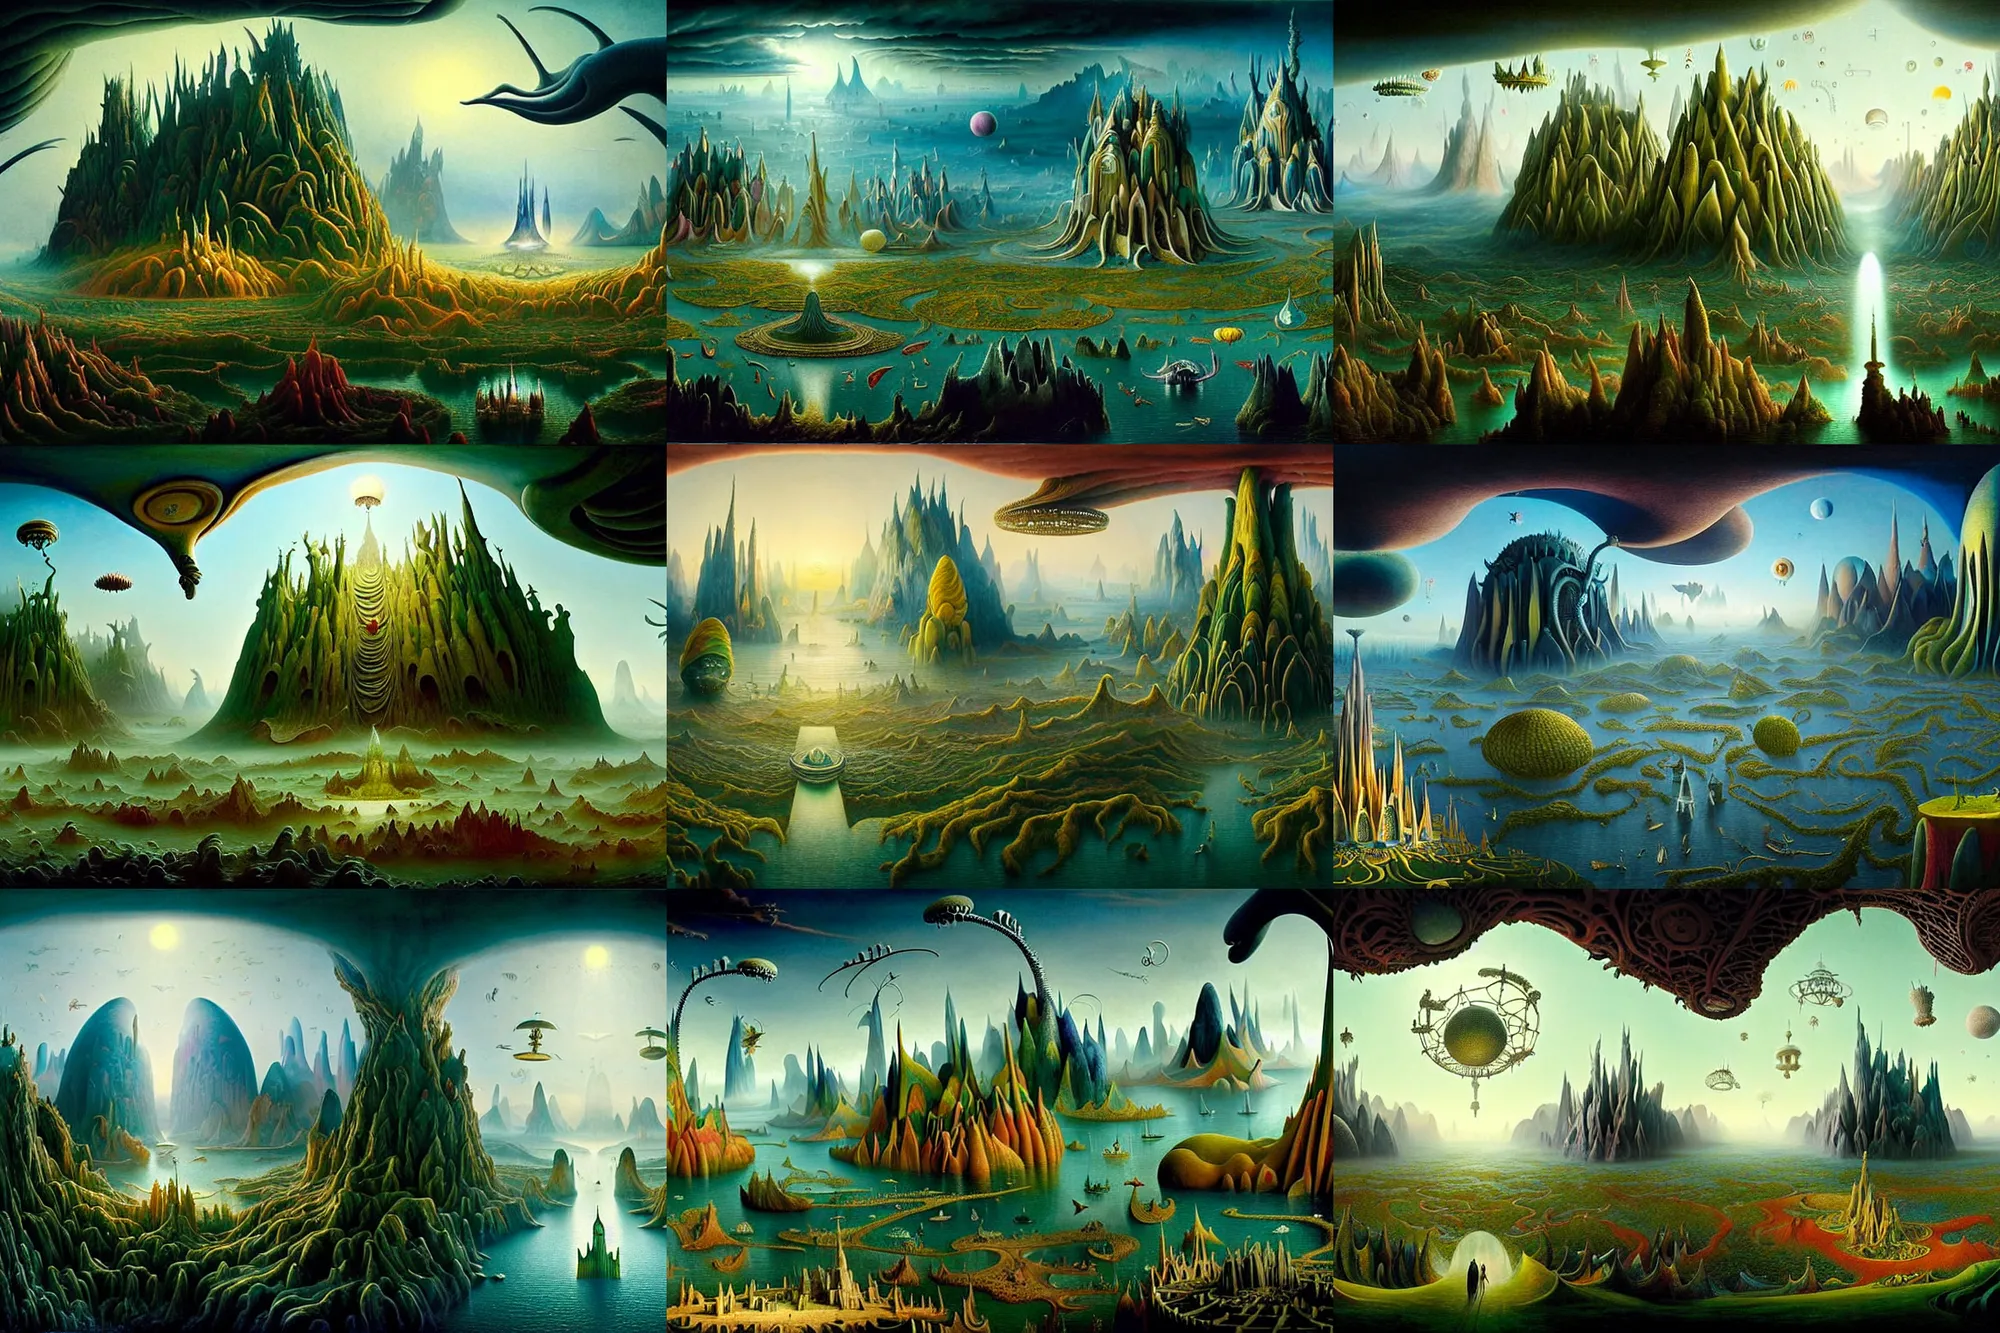 Prompt: a beguiling epic stunning beautiful and insanely detailed matte painting of alien dream worlds with surreal architecture designed by Heironymous Bosch, mega structures inspired by Heironymous Bosch's Garden of Earthly Delights, vast surreal landscape and horizon by Asher Durand and Oh Ji Hoon, masterpiece!!!, grand!, imaginative!!!, whimsical!!, epic scale, intricate details, sense of awe, elite, wonder, insanely complex, masterful composition!!!, sharp focus, fantasy realism, dramatic lighting